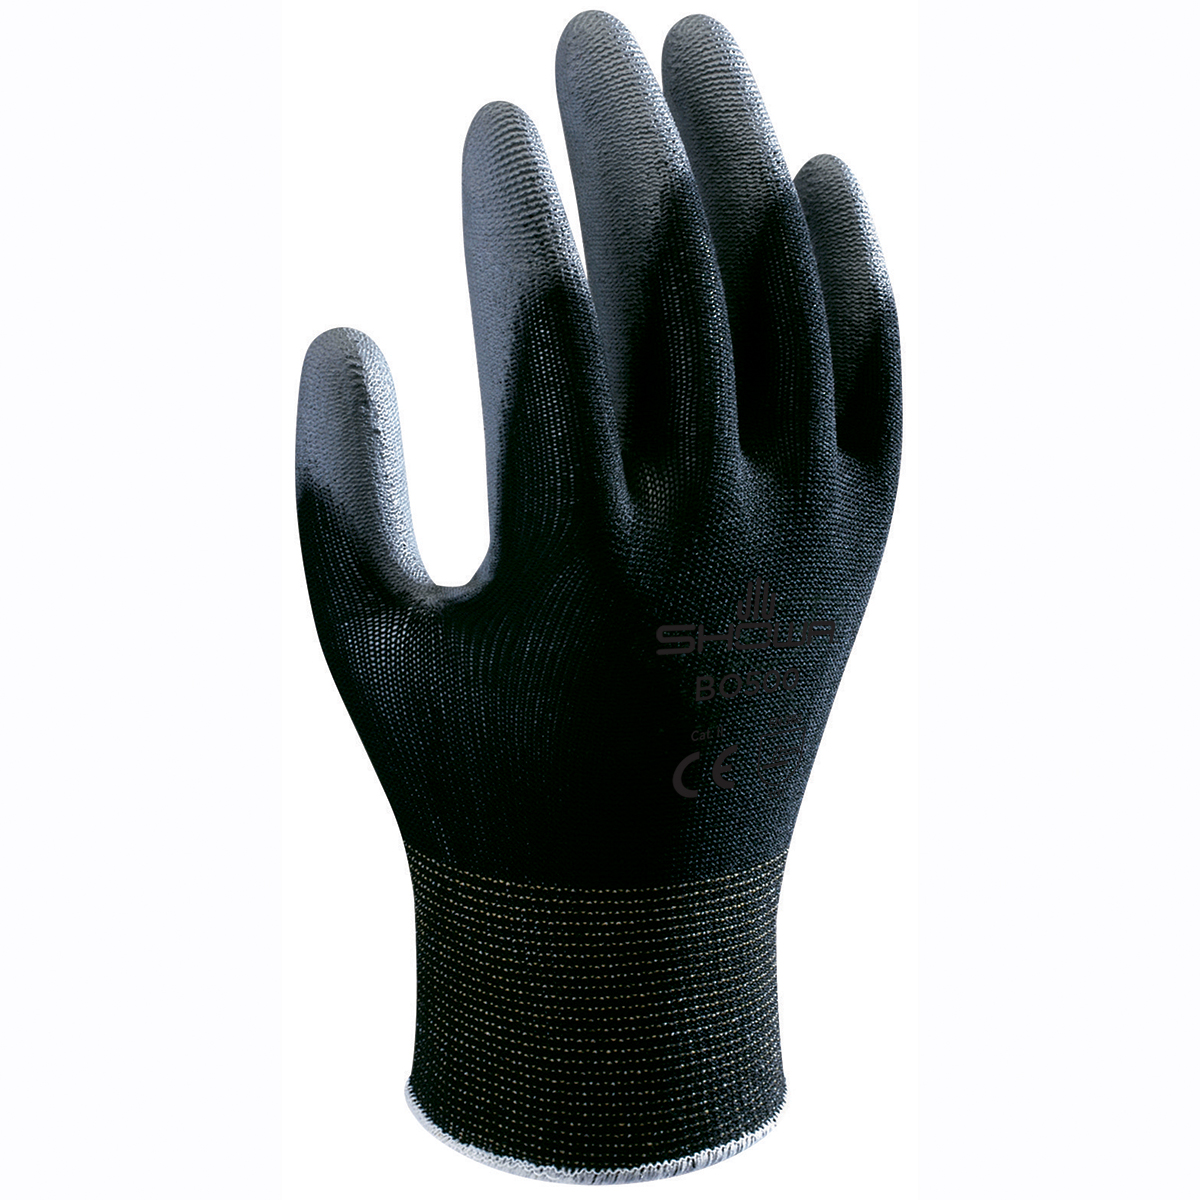 Showa 300L-09 Atlas Fit 300 Rubber-Coated Gloves Large Gray/Blue (12 Pair)